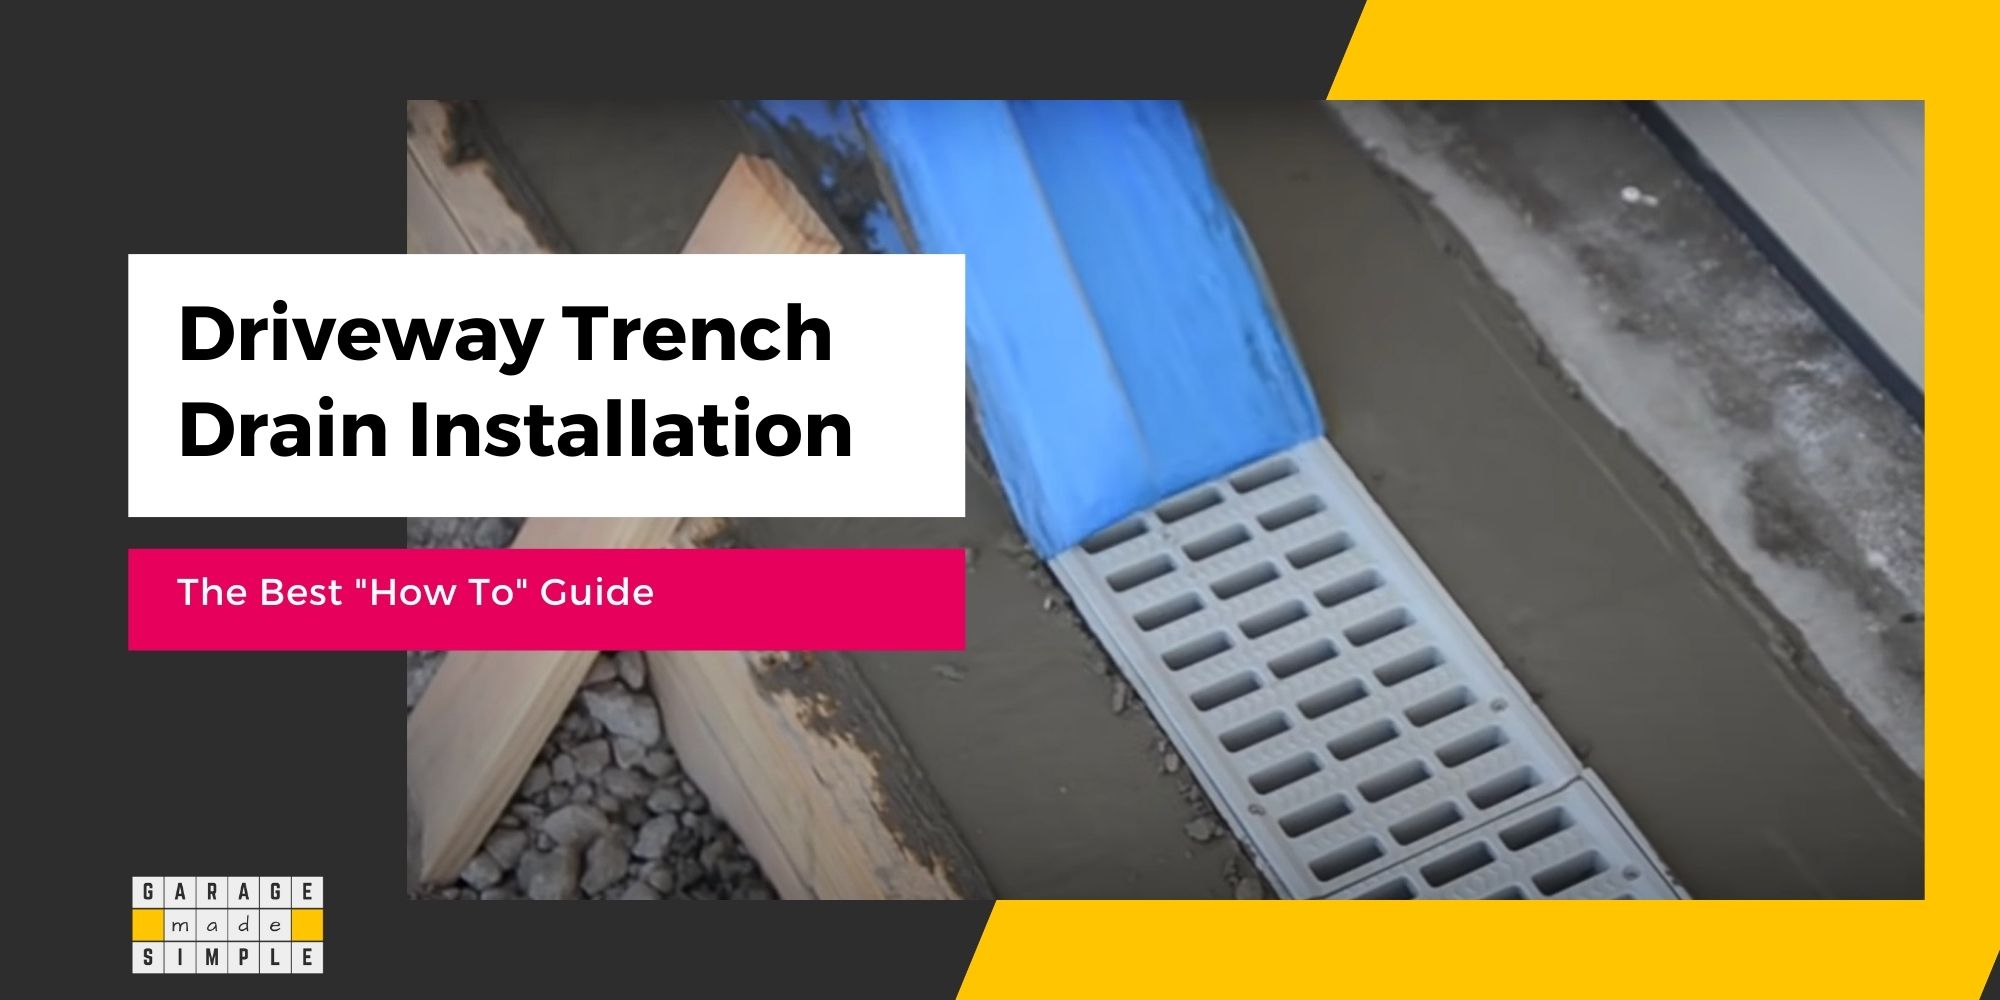 9 Step Easy Guide to Driveway Trench Drain Installation